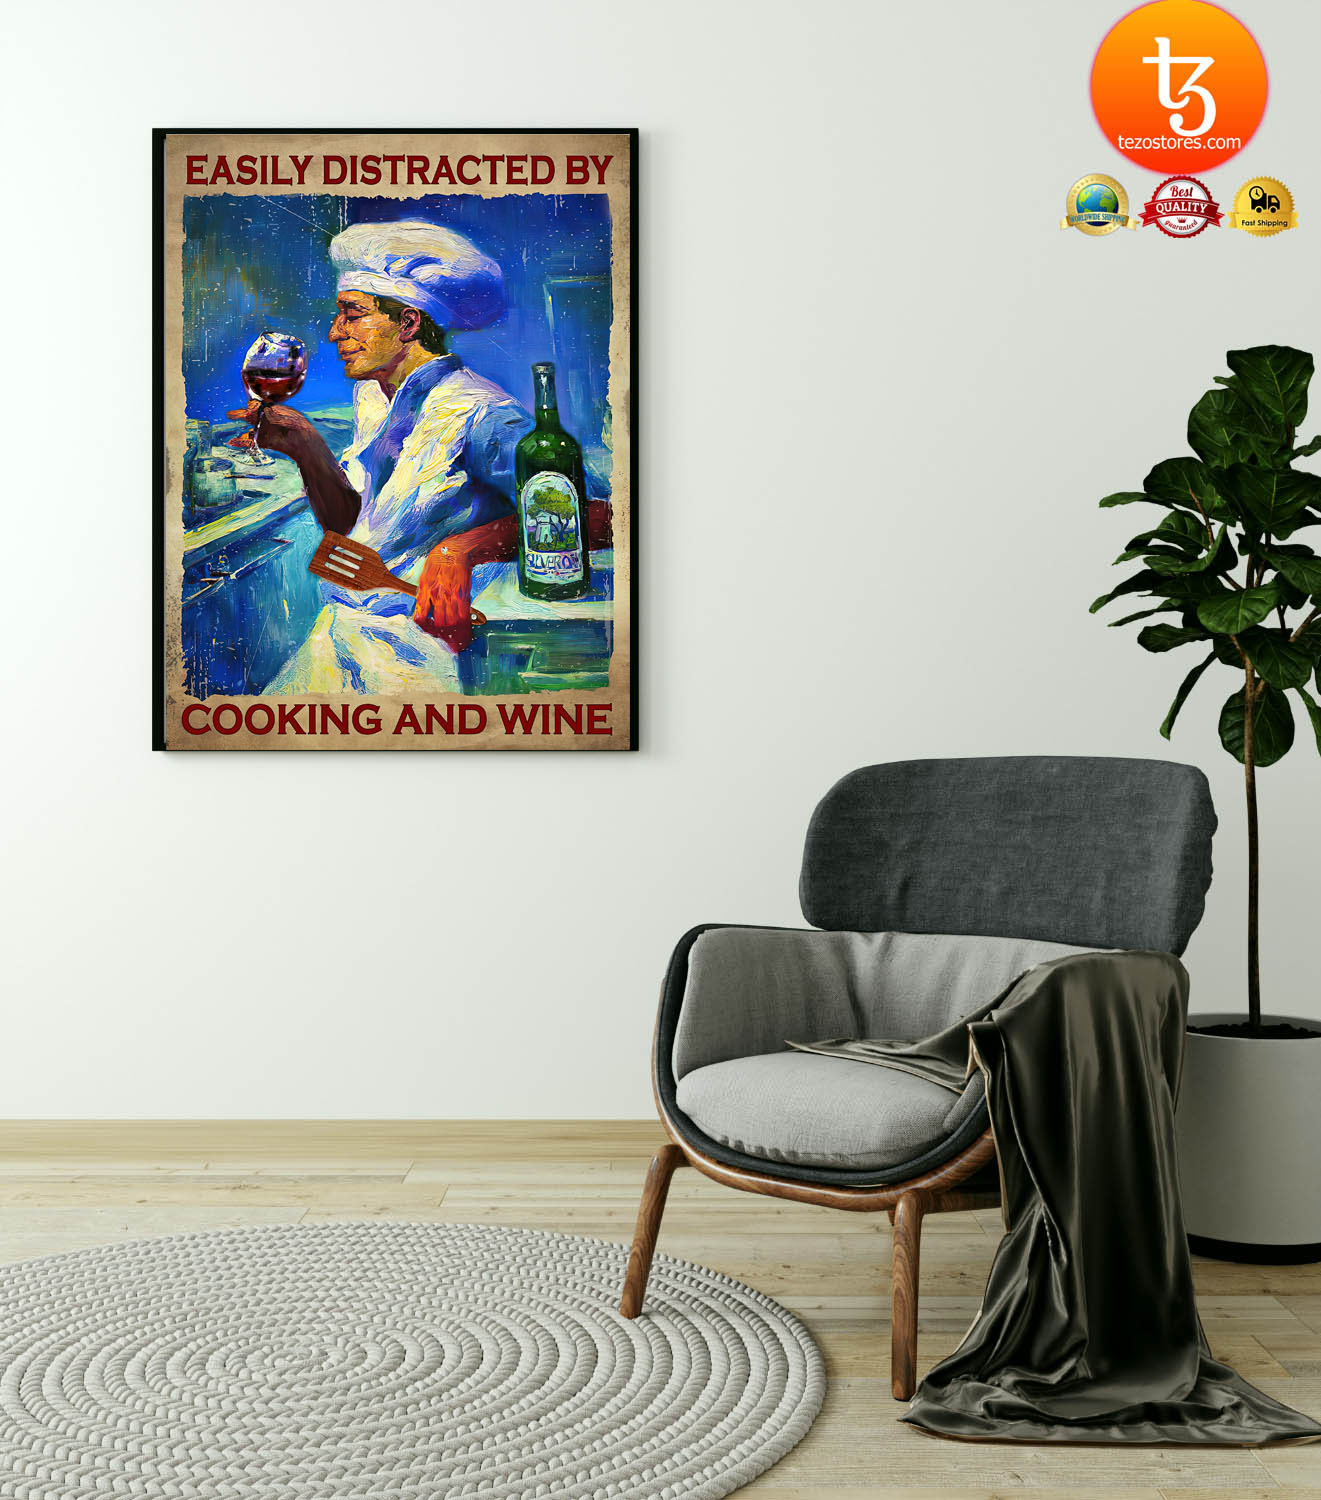 Easily distracted by cooking and wine poster1